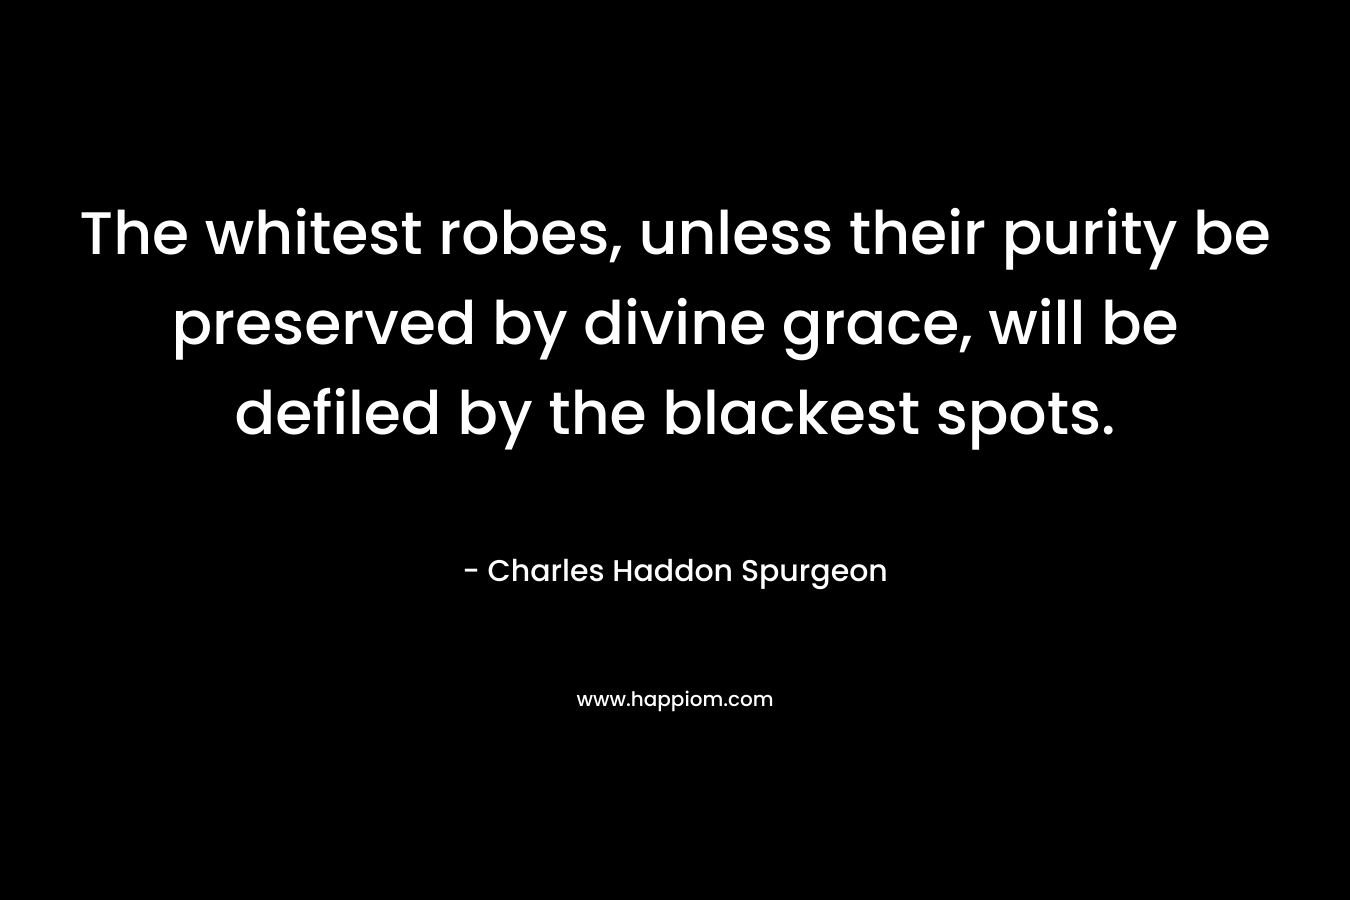 The whitest robes, unless their purity be preserved by divine grace, will be defiled by the blackest spots.